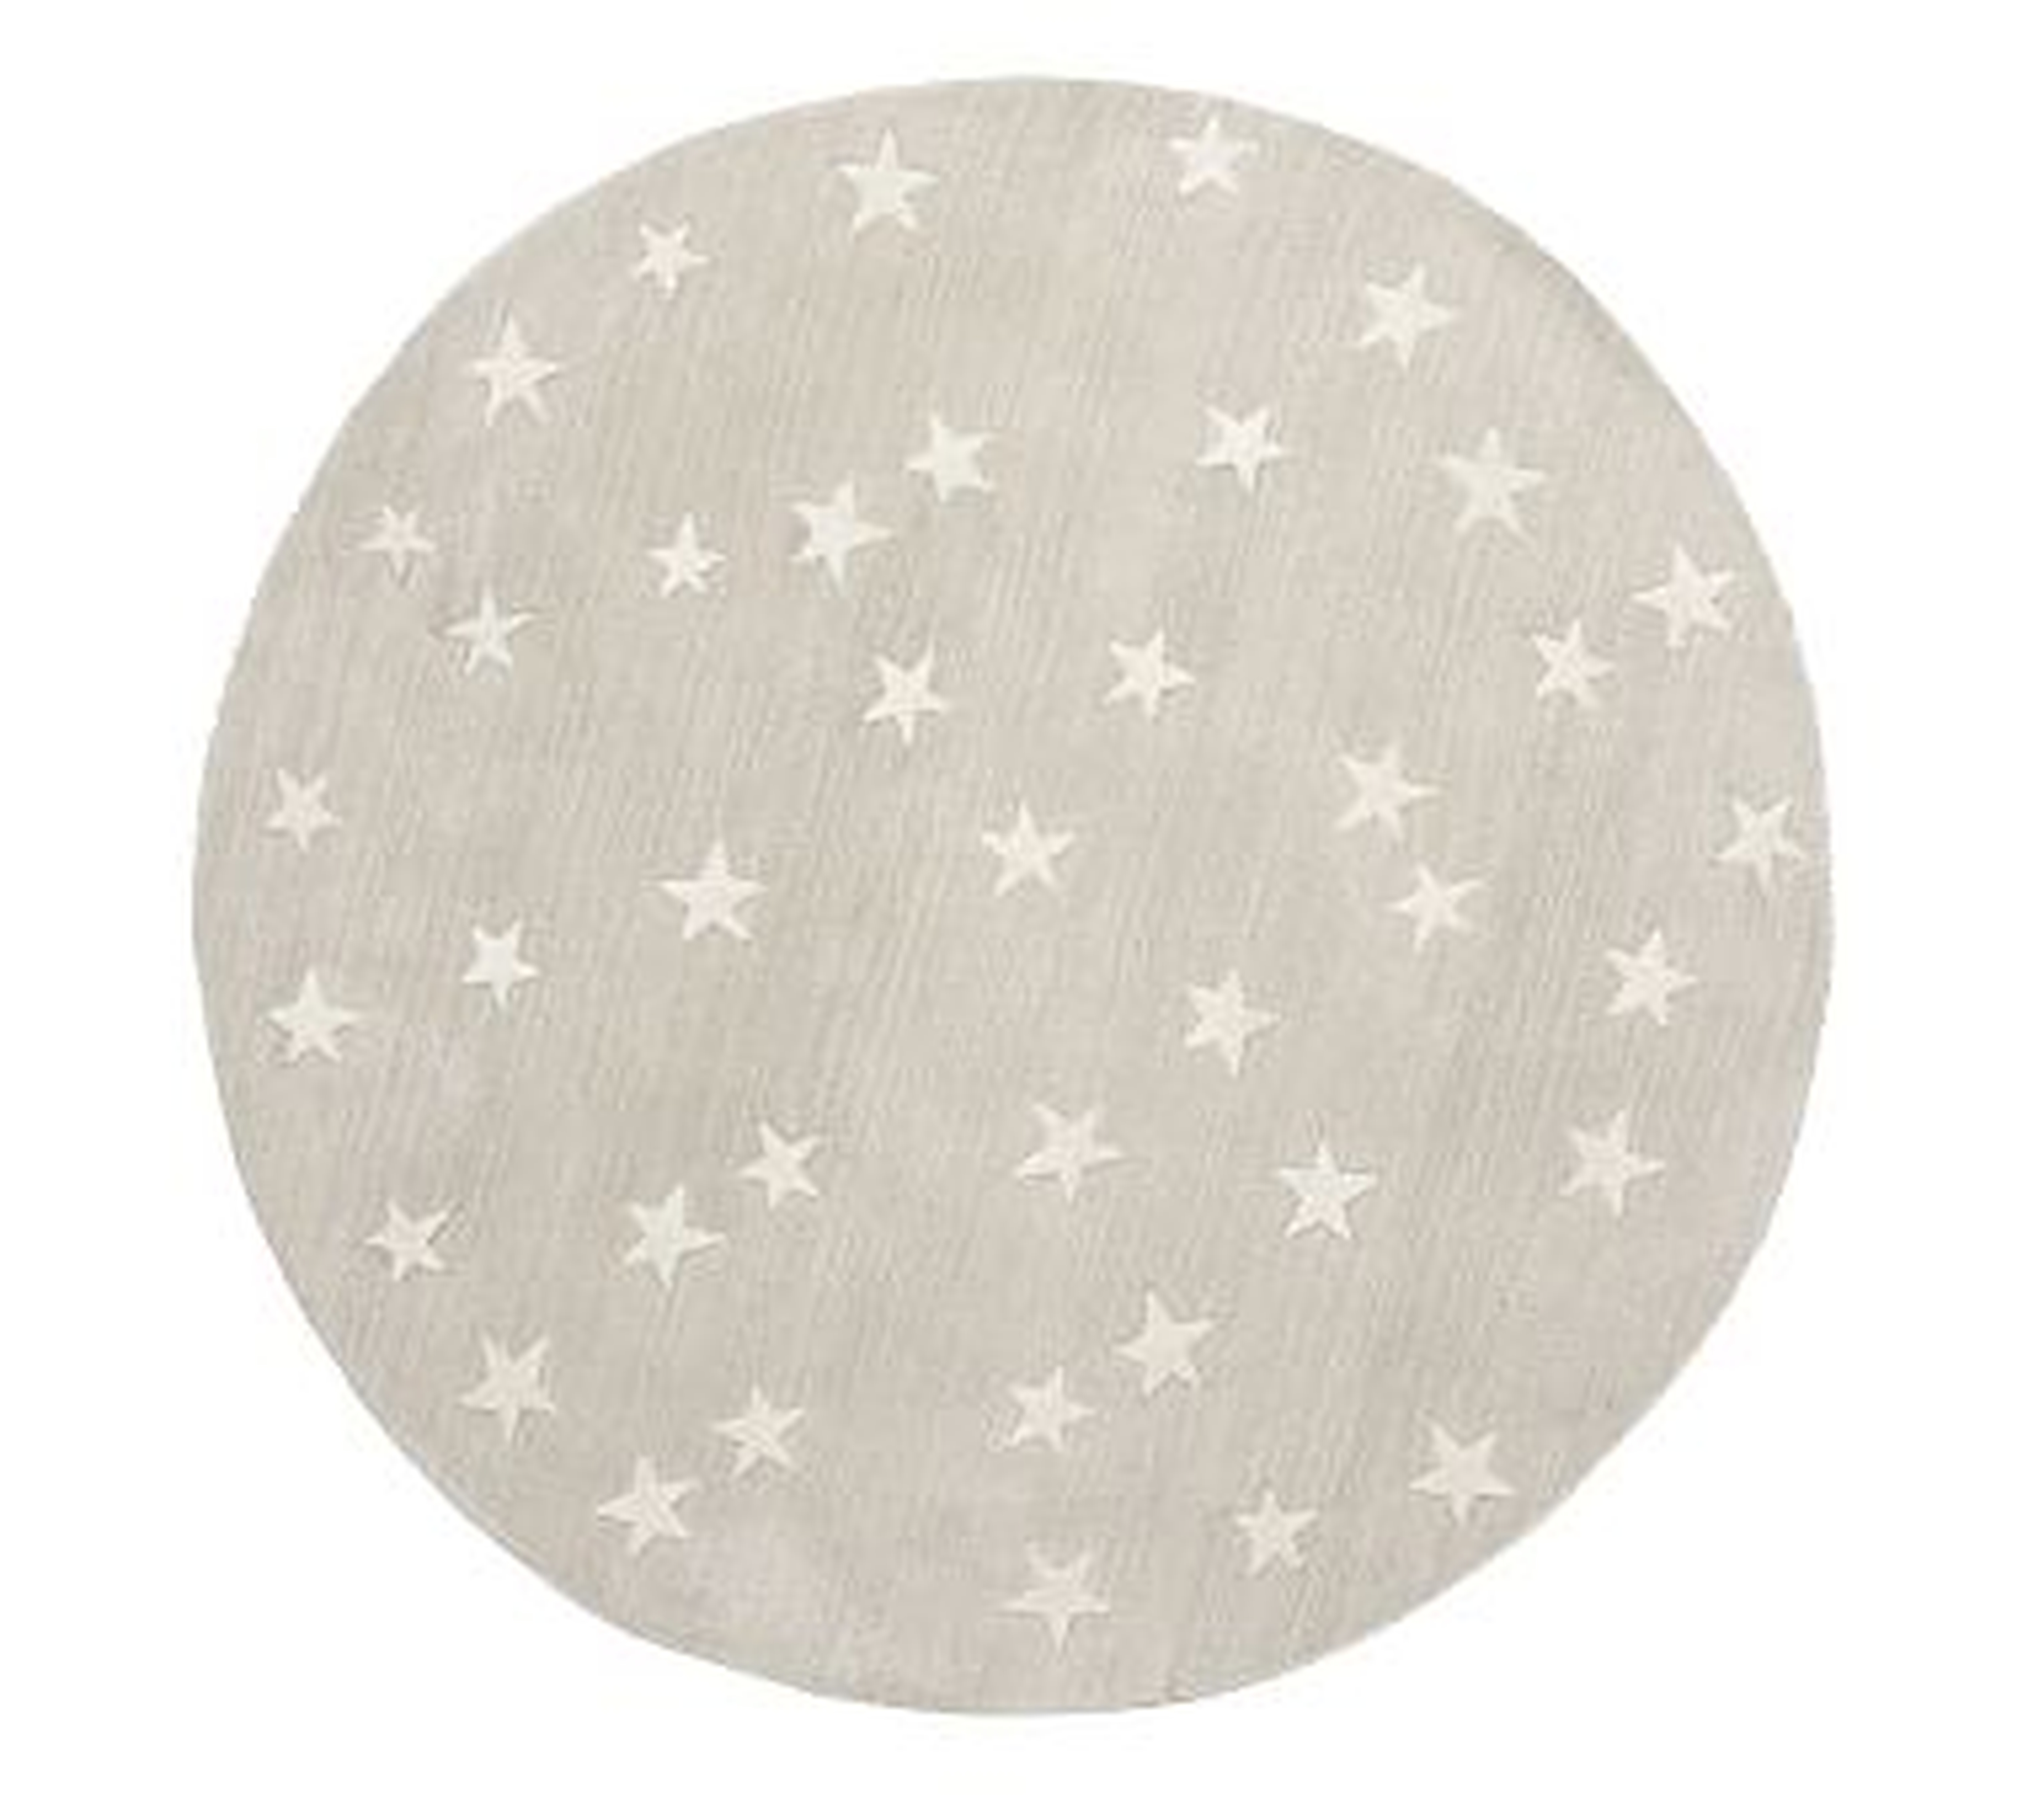 Starry Skies Round Rug, 5 Ft Round, Natural - Pottery Barn Kids